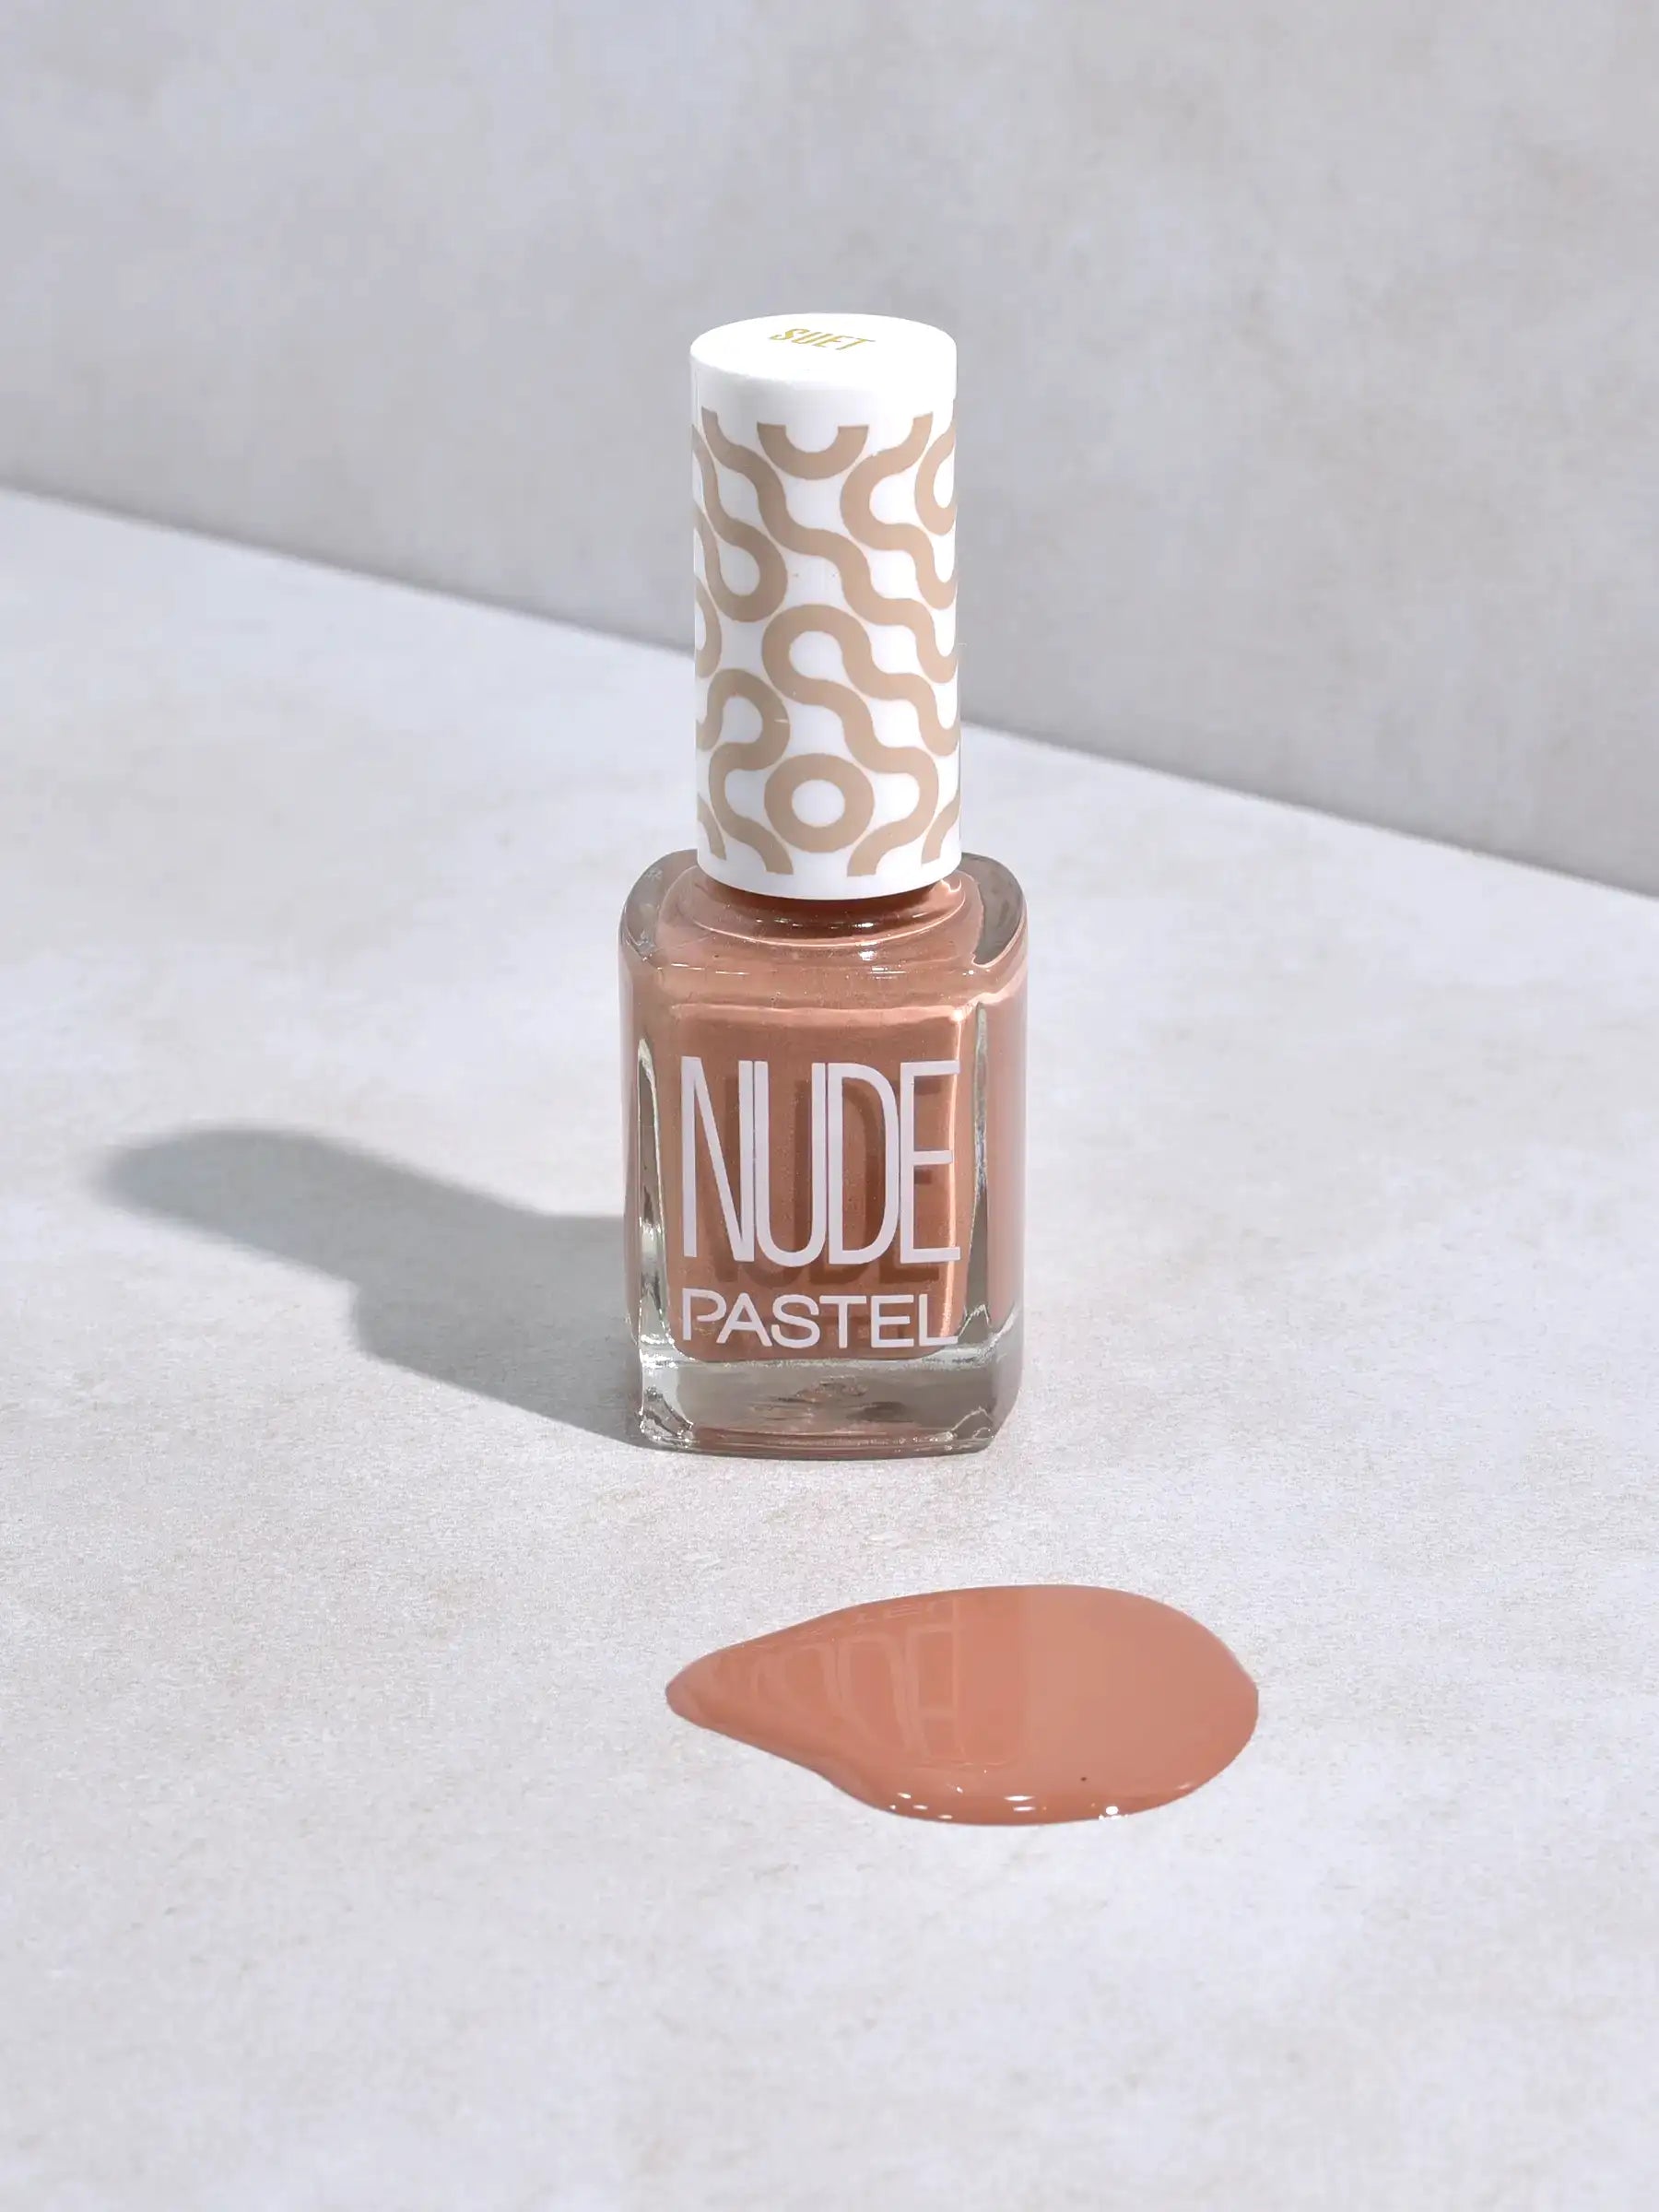 NUDE BY PASTEL NAIL POLISH 761 SUEDE